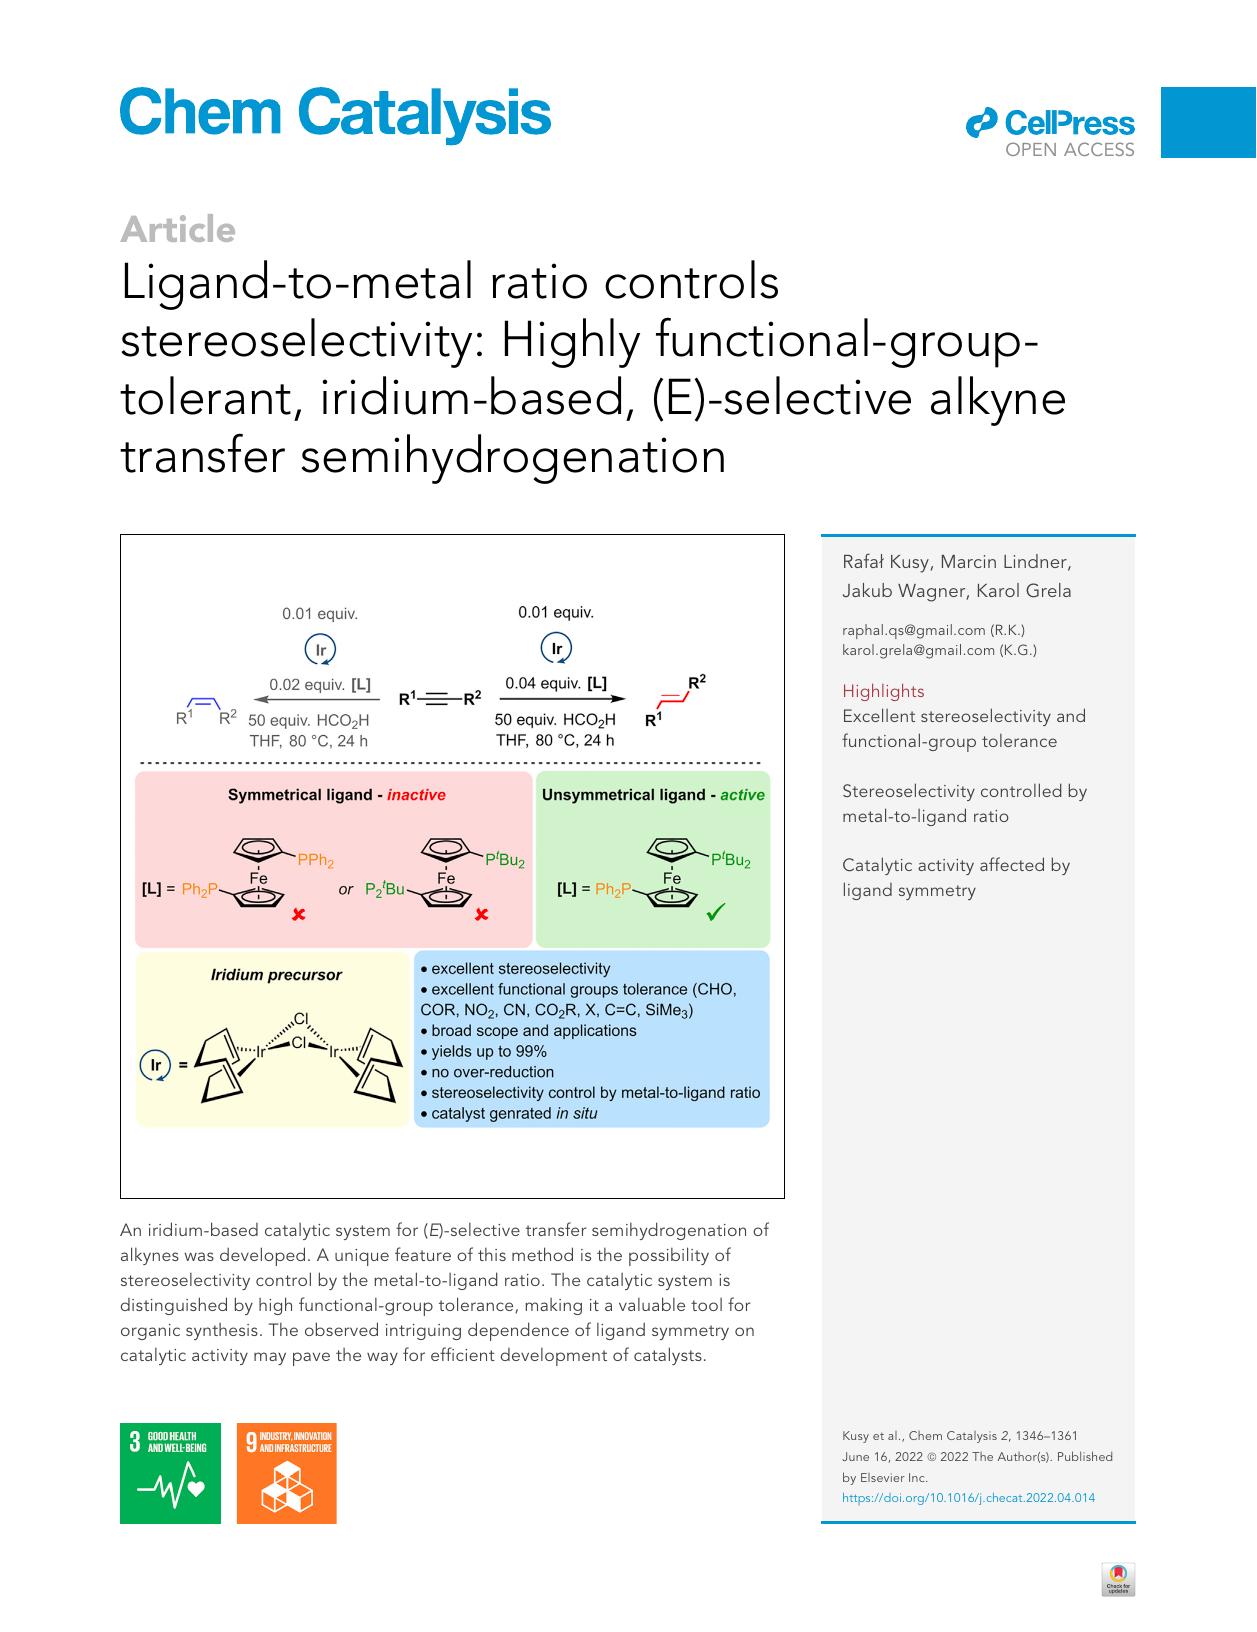 Ligand-to-metal ratio controls stereoselectivity: Highly functional-group-tolerant, iridium-based, (E)-selective alkyne transfer semihydrogenation by Rafał Kusy